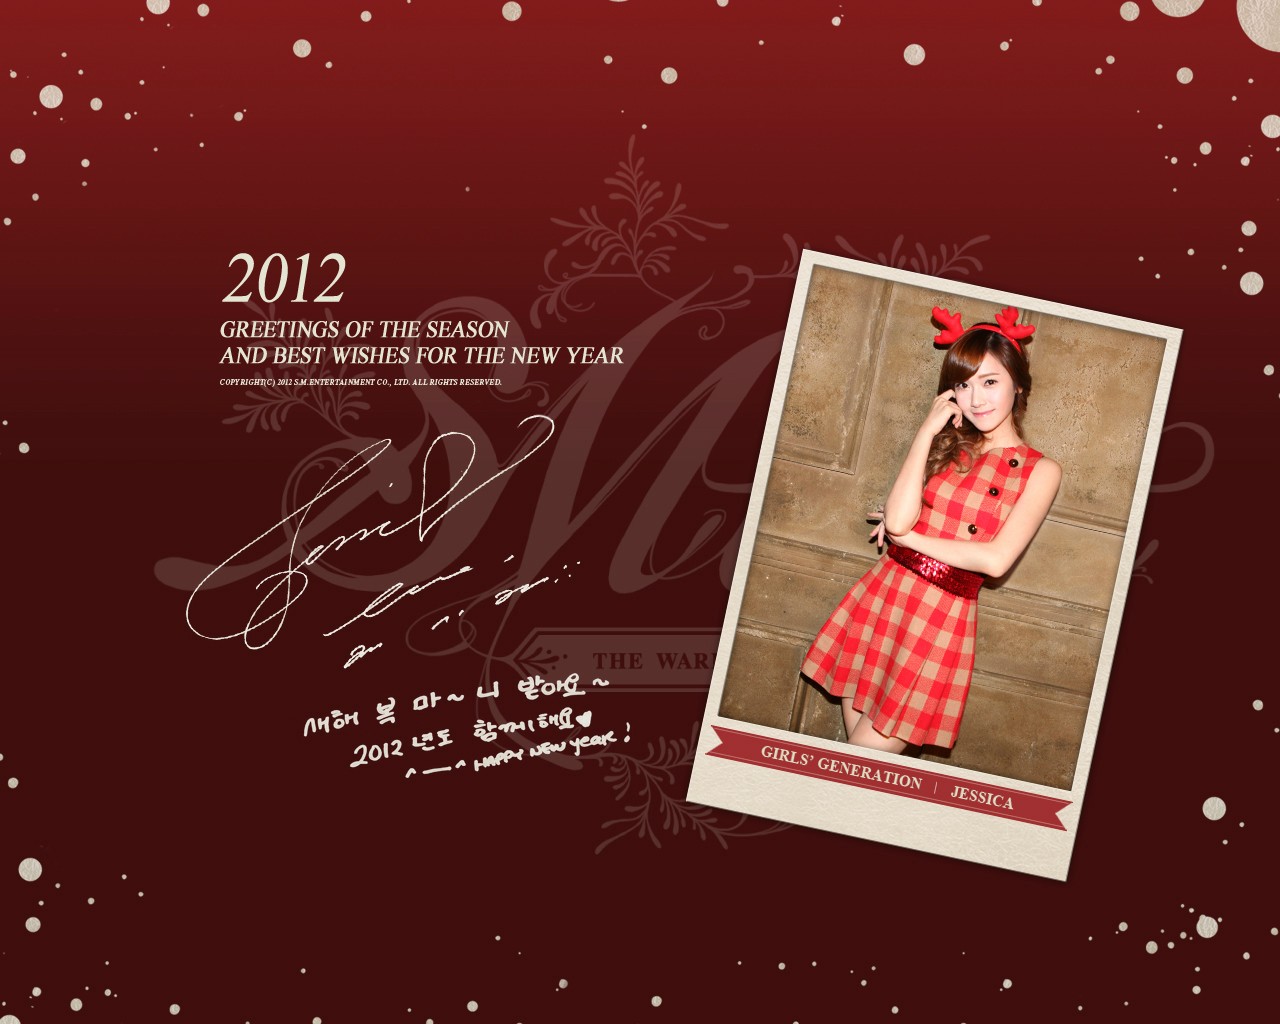 [OFFICIAL][02-01-2012] SNSD @ 2012 New Year Message! AanobUqh